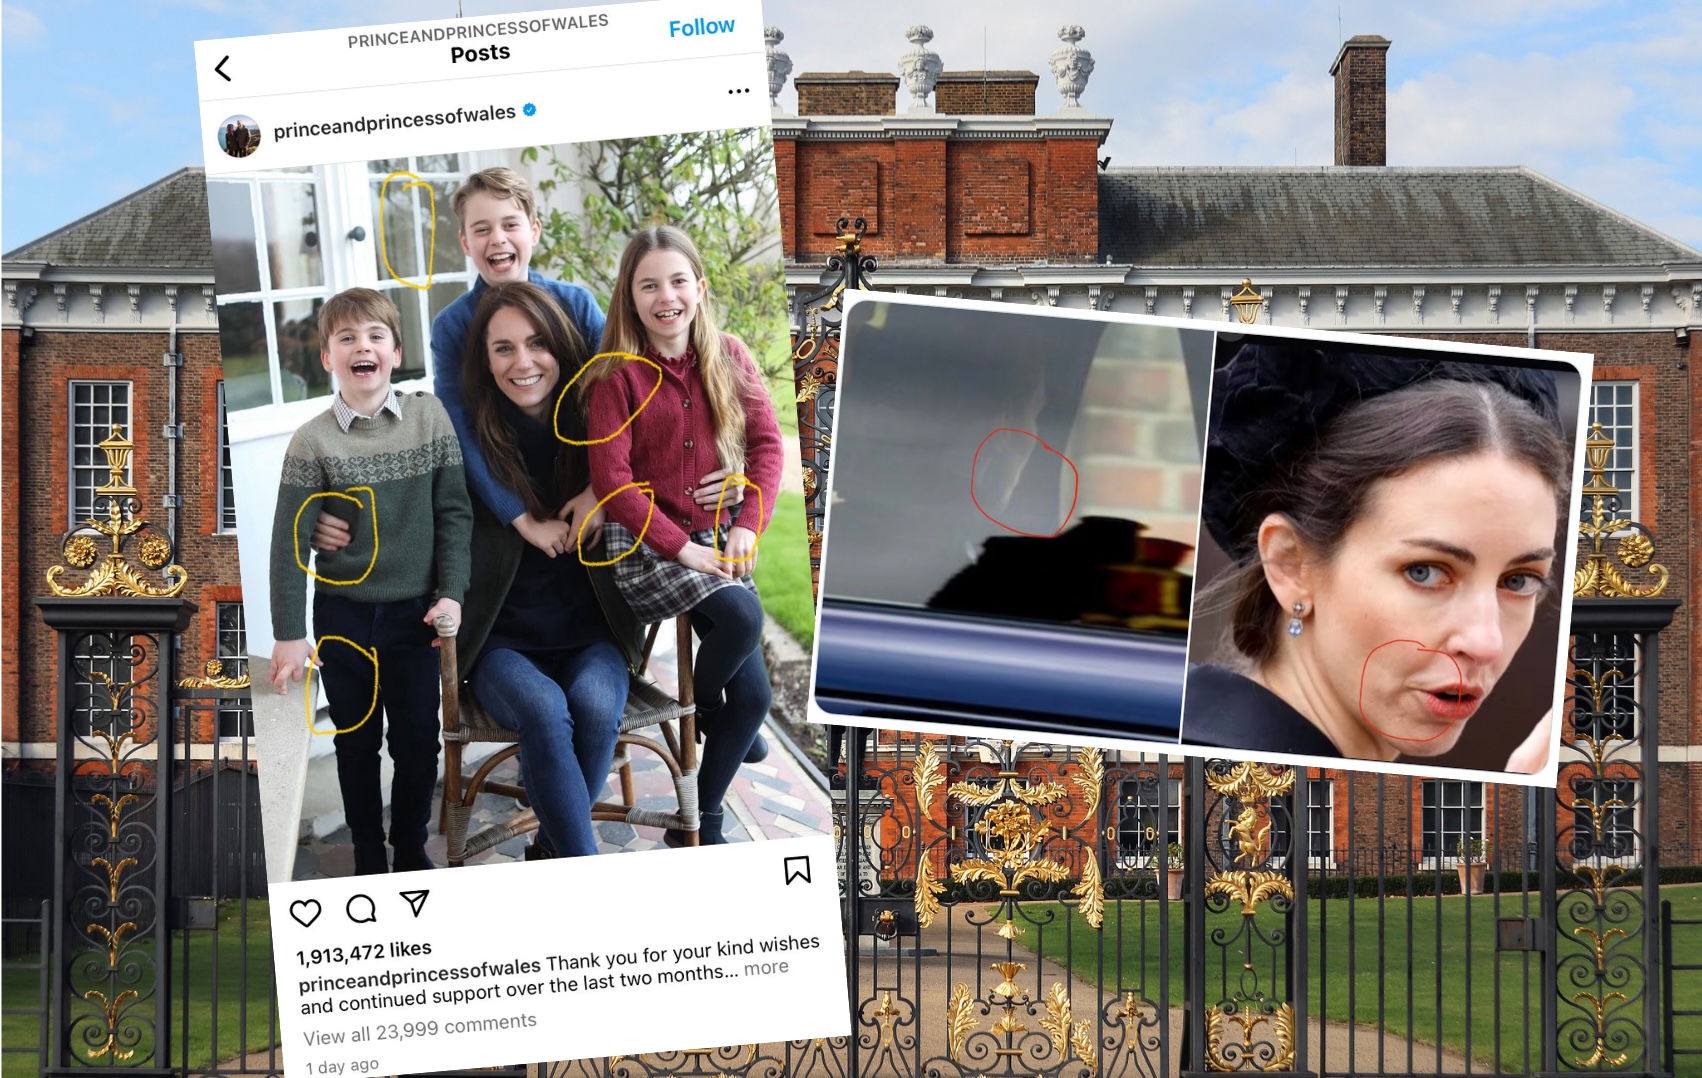 It's getting weirder: BuzzFeed News' former royals reporter on Kate  Middleton, Palace PR, and distrust in the media (updated)